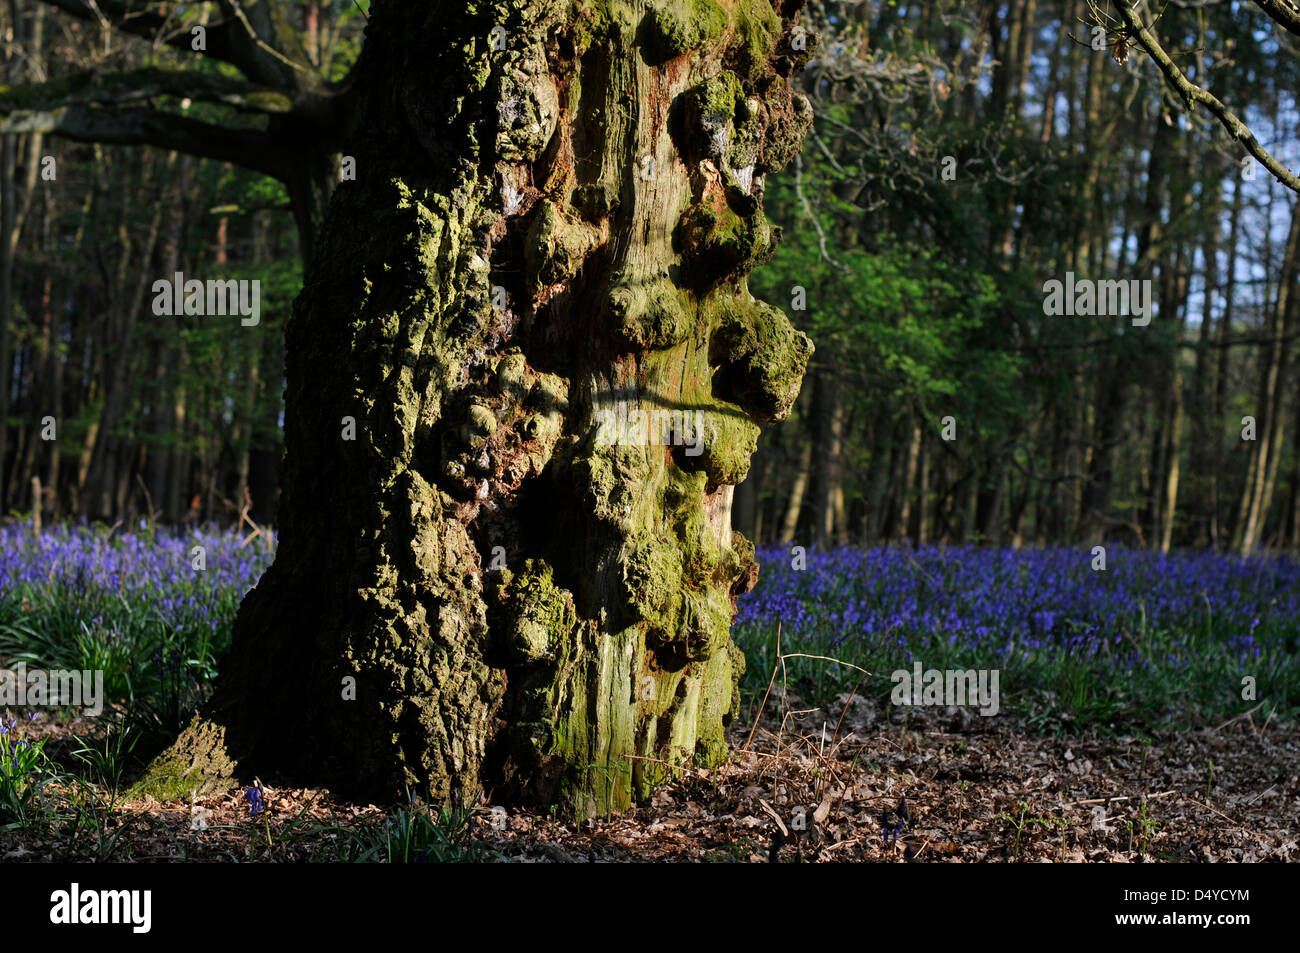 An old knobbly tree in an area of woodland in Cockernhoe/Tea Green, Hertfordshire, England. Stock Photo